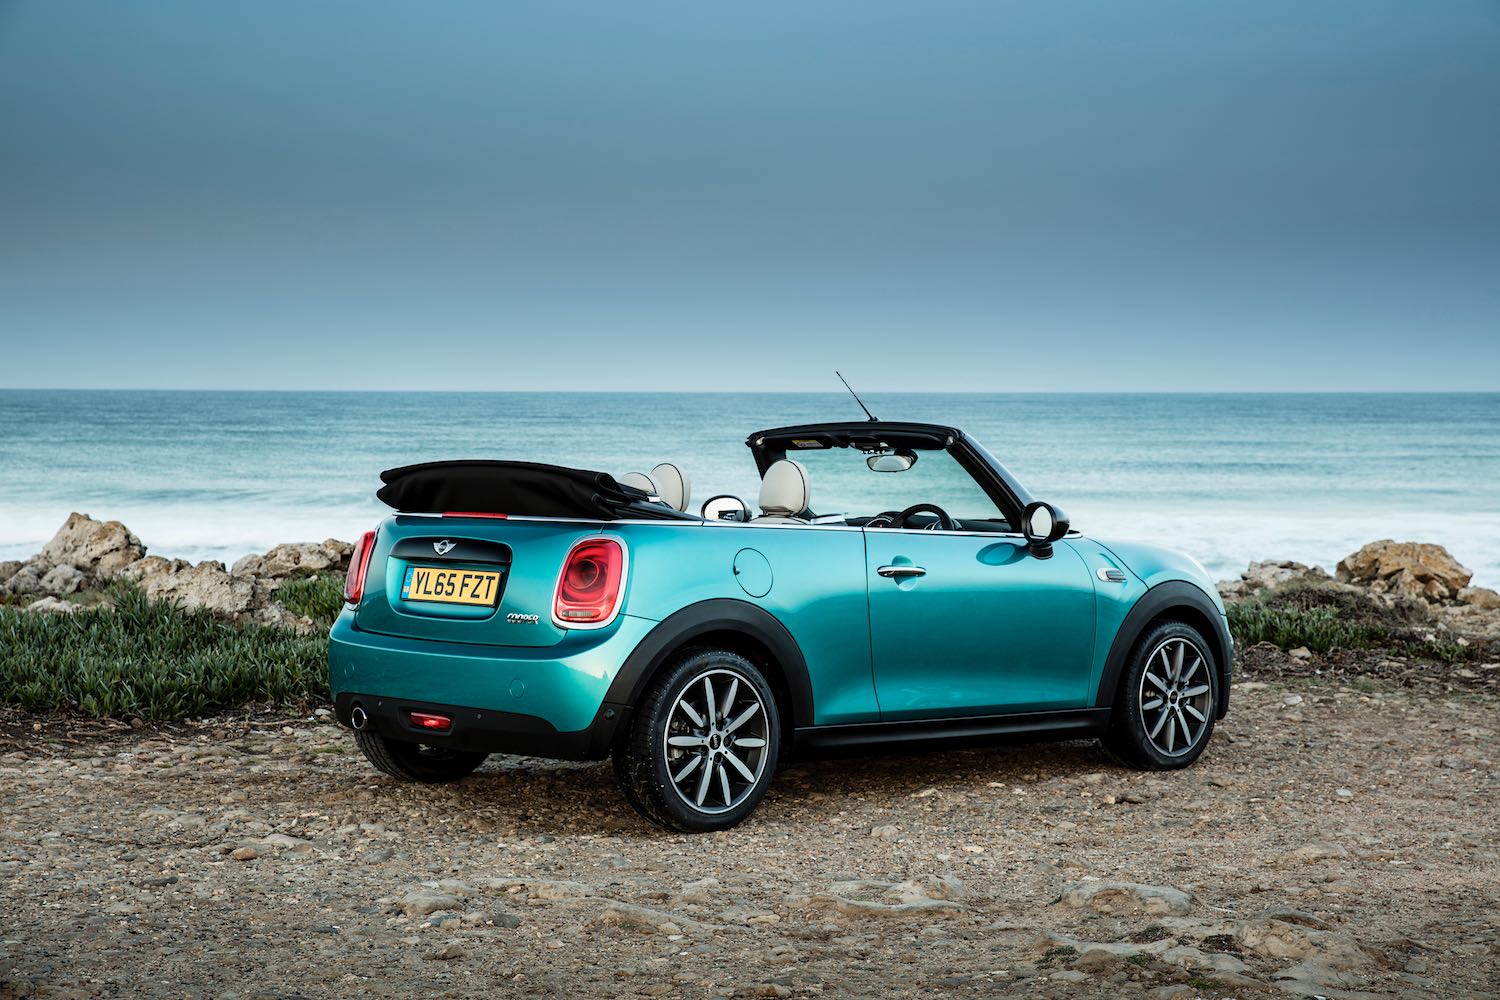 Neil Lyndon reviews the Best selling open top MINI Cooper Convertible for Drive 2